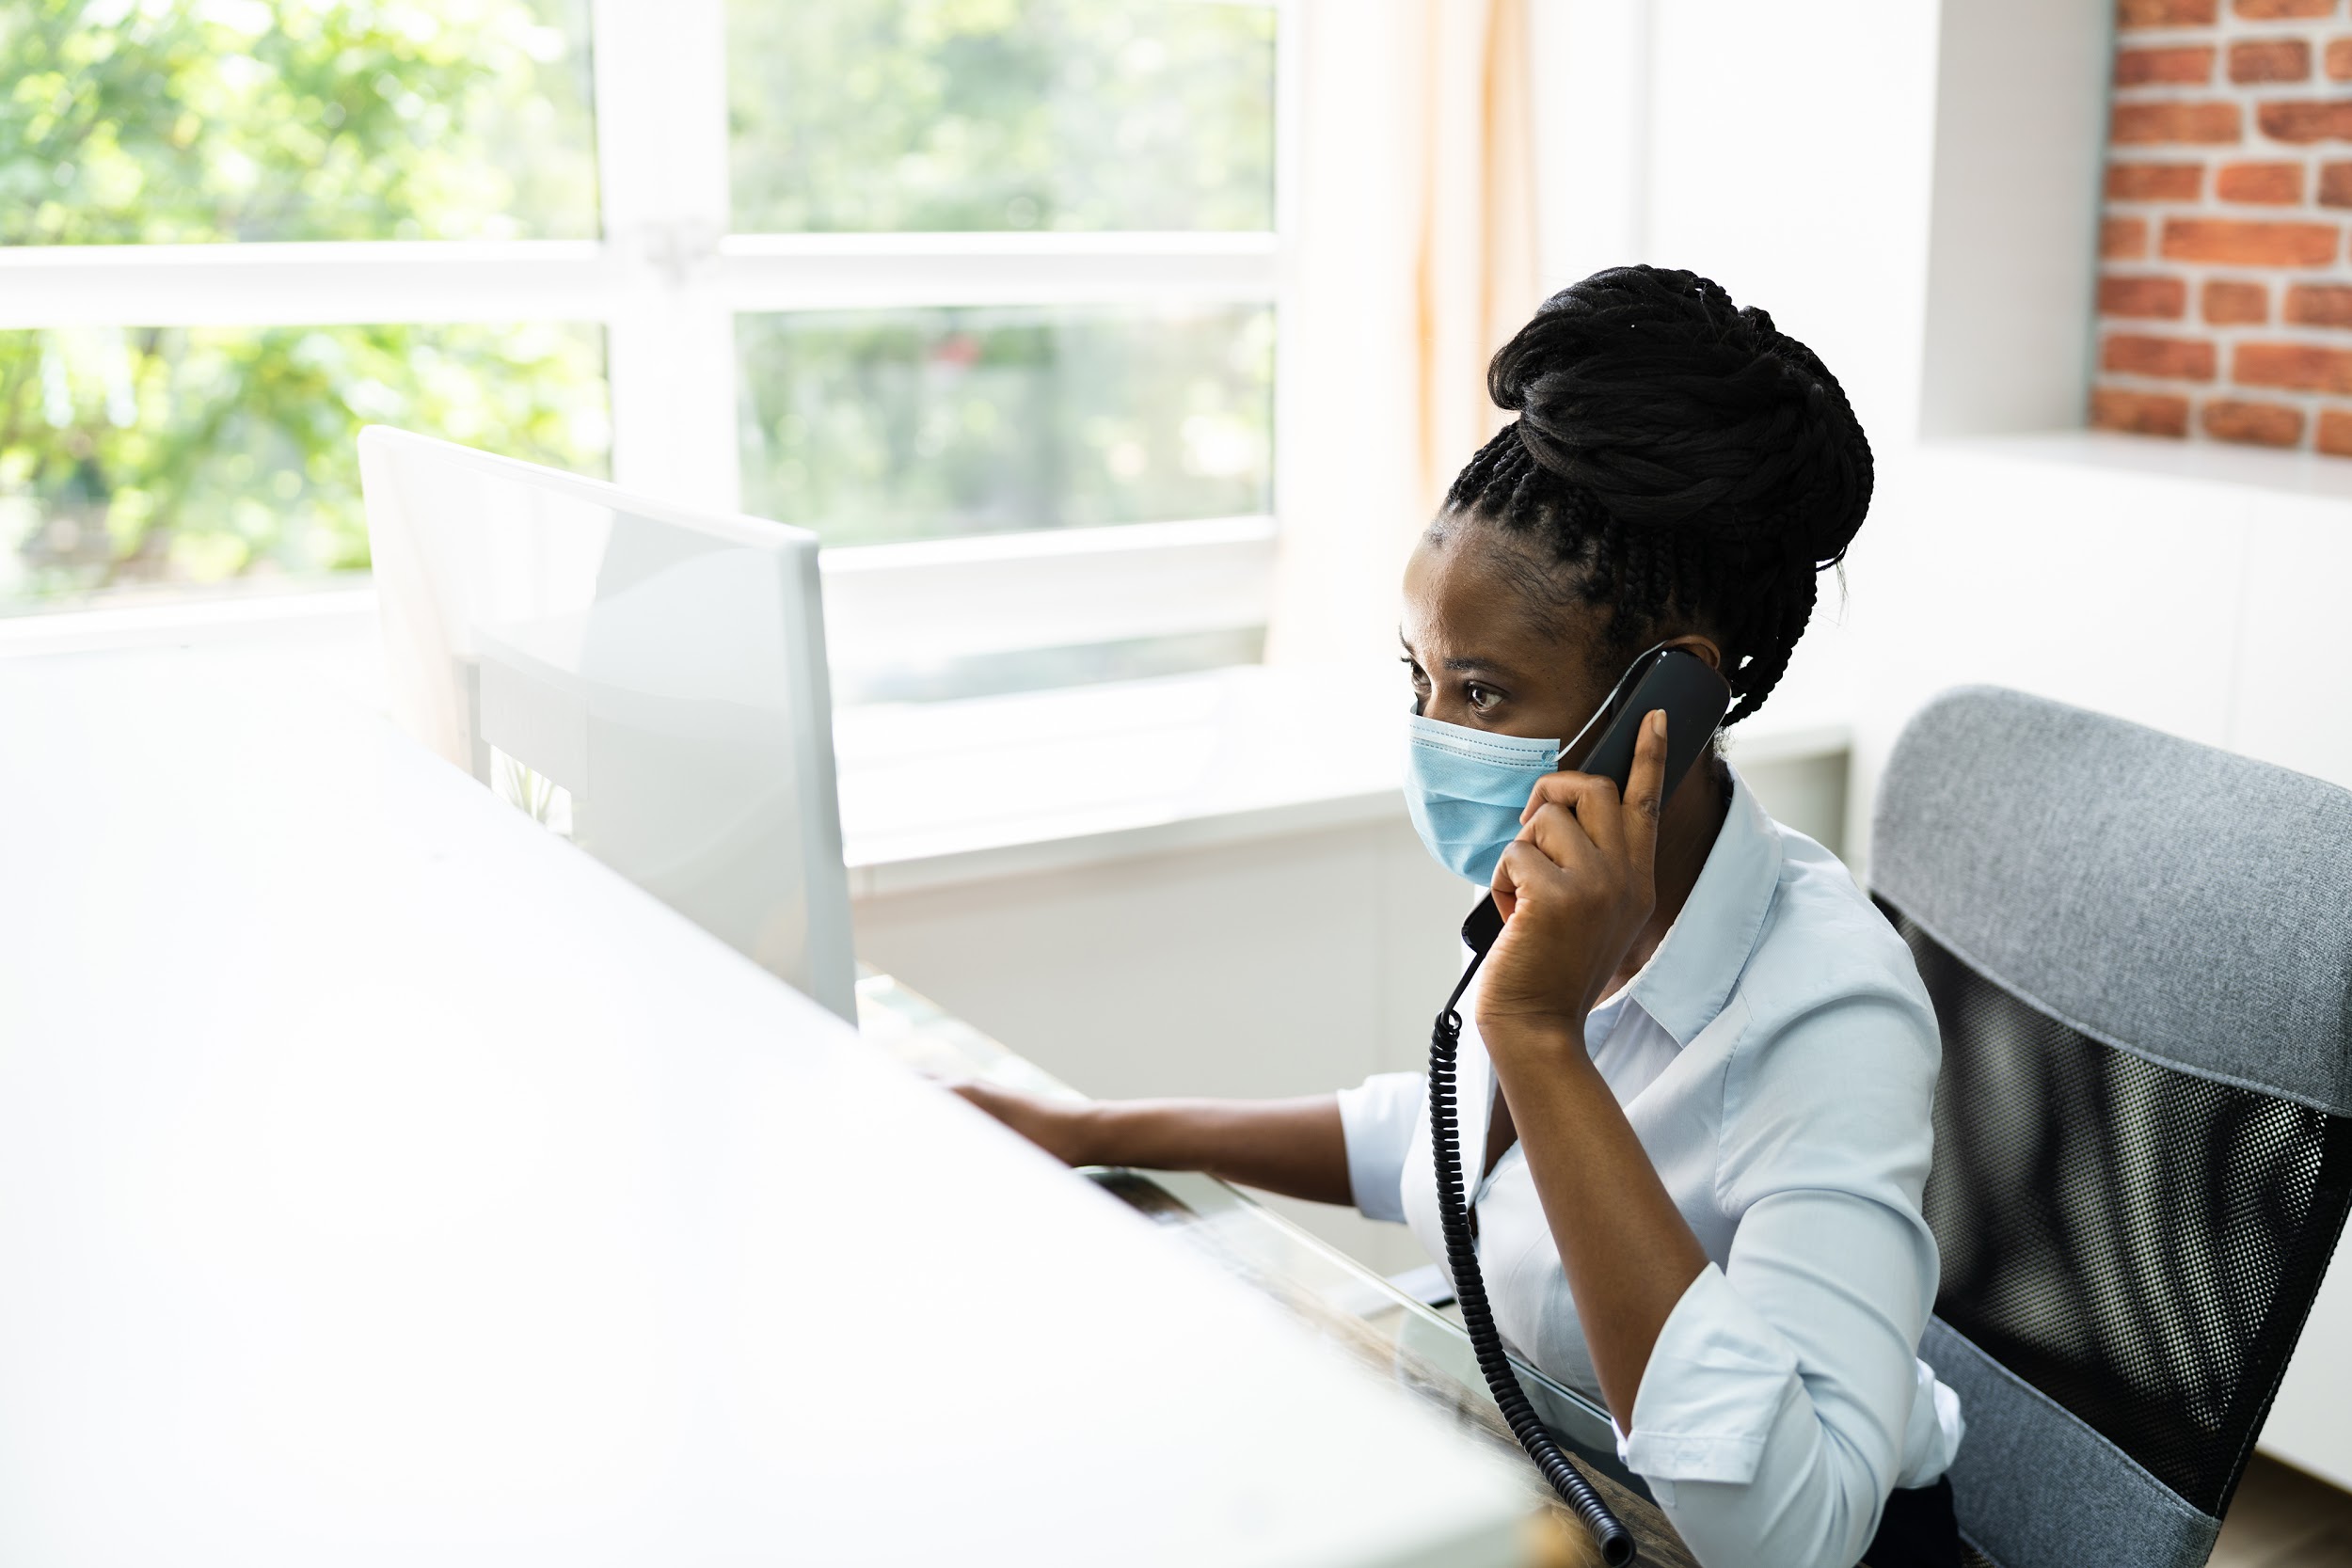 Can Bad Medical Customer Service Hurt Your Practice?